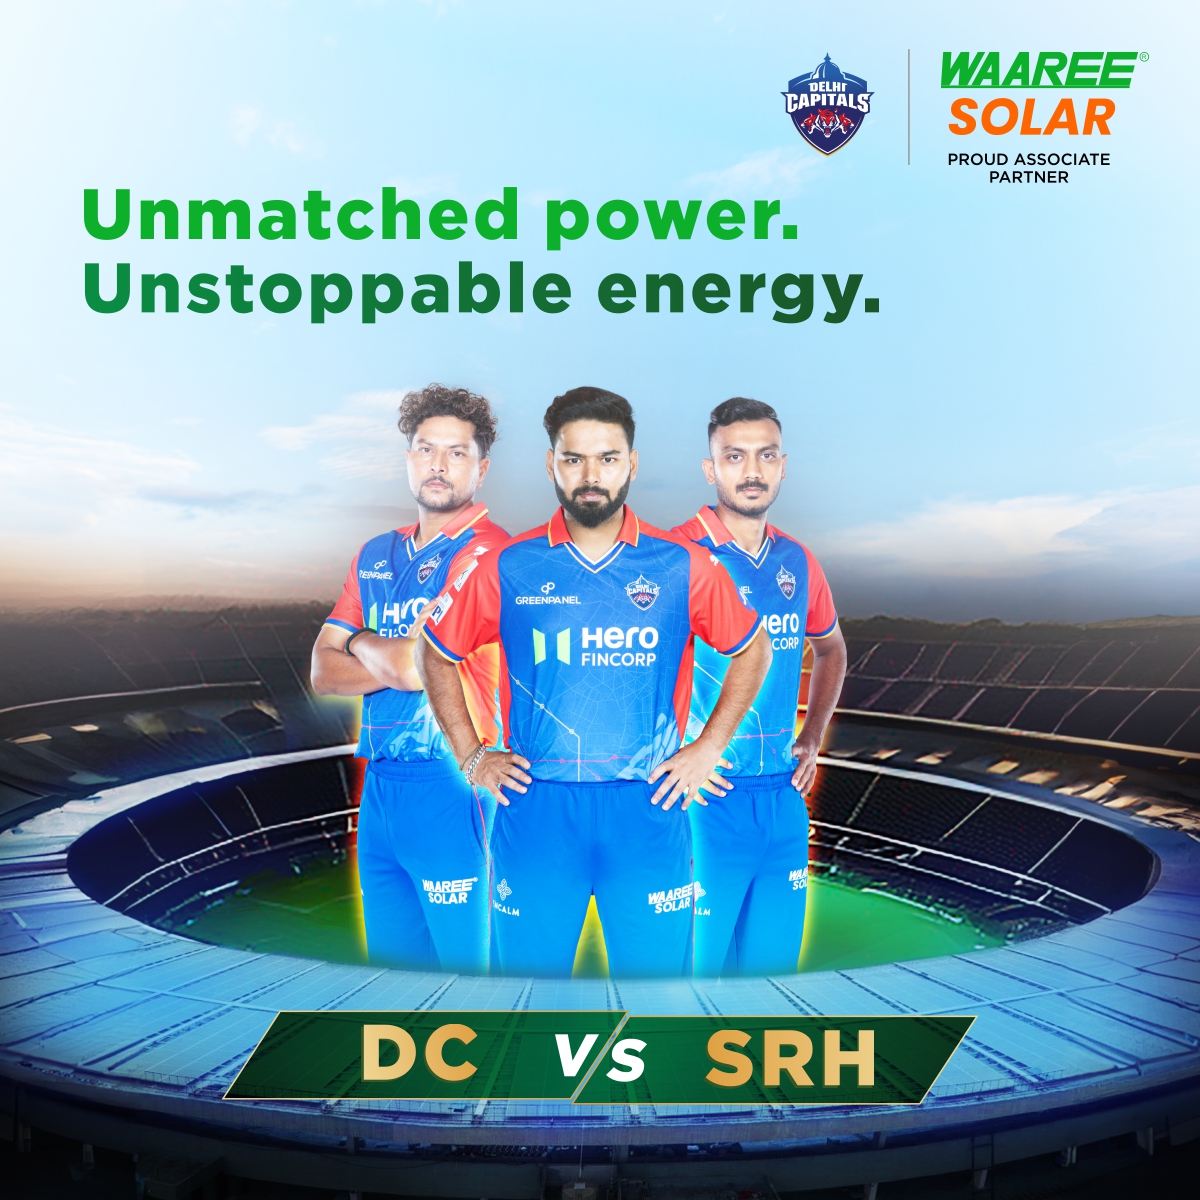 Game day vibes are in full swing!  Our team is geared up, pumped, and ready to dominate the ground.🏏
We're cheering you on every step of the way! 

#WaareeSolar #DelhiCapitals #IPL2024 #PoweringPerformance #waaree #solar